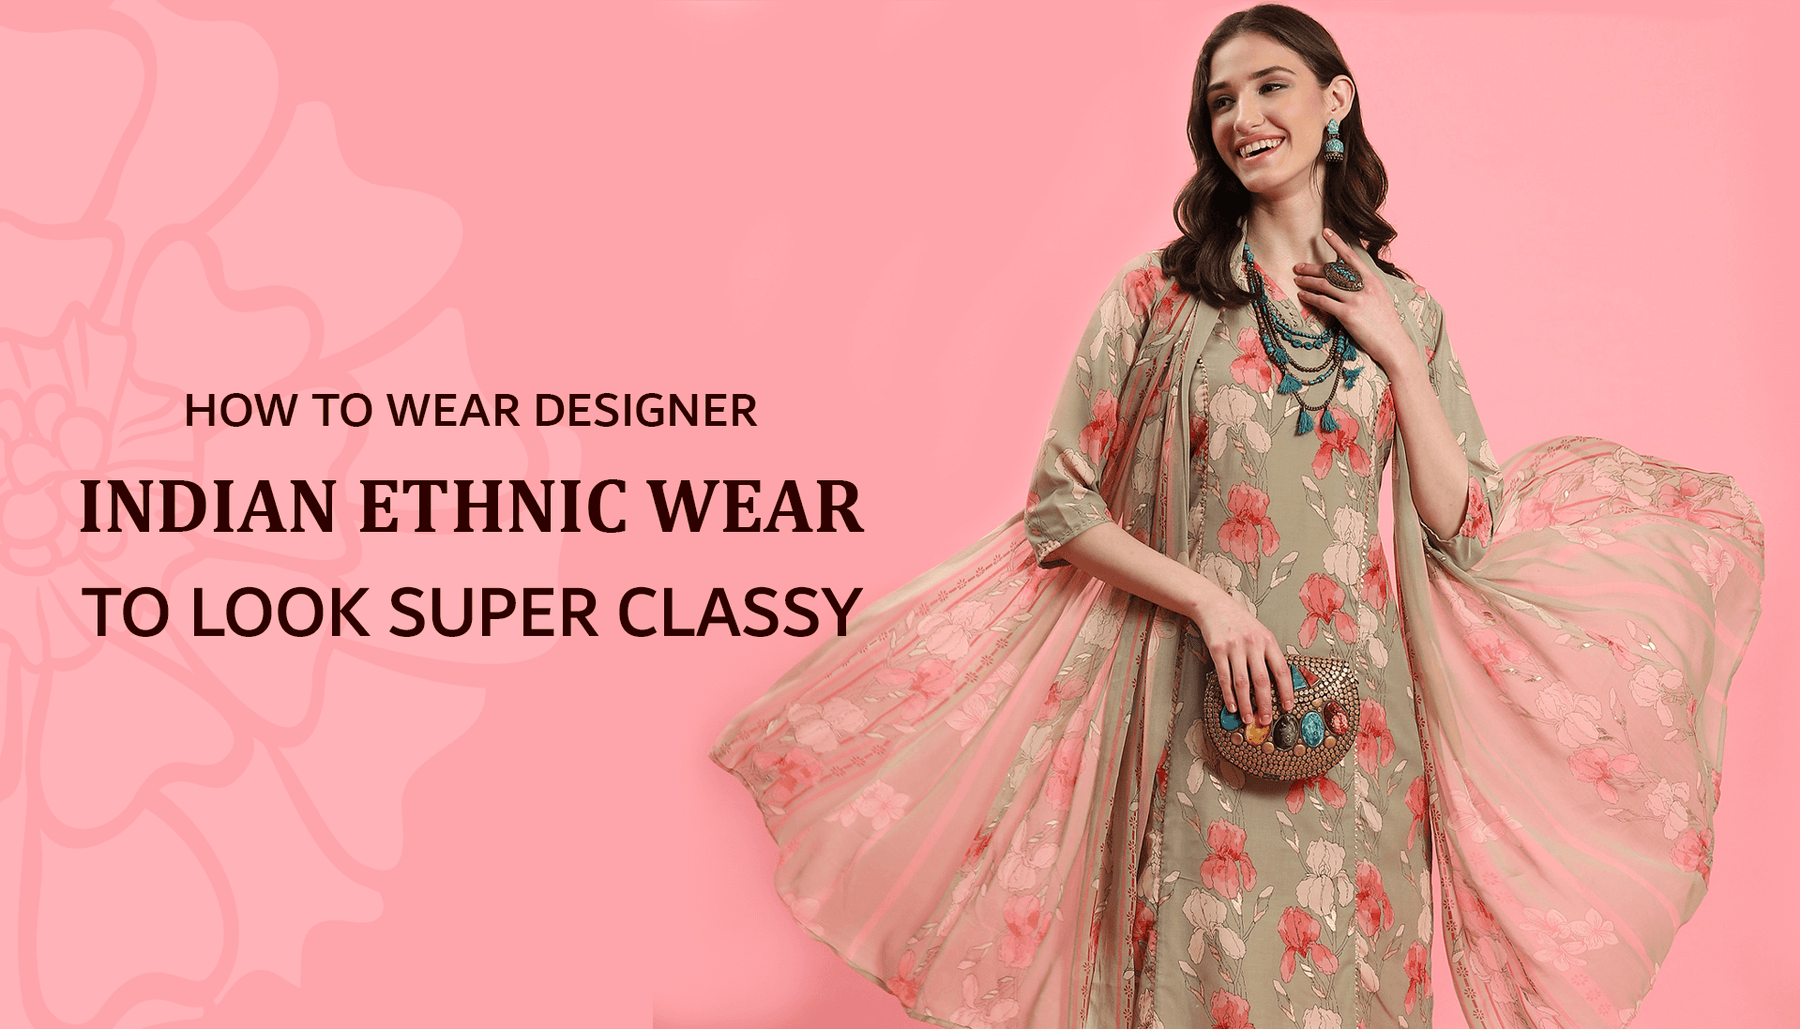 How to Wear Designer Indian Ethnic Wear to Look Super Classy